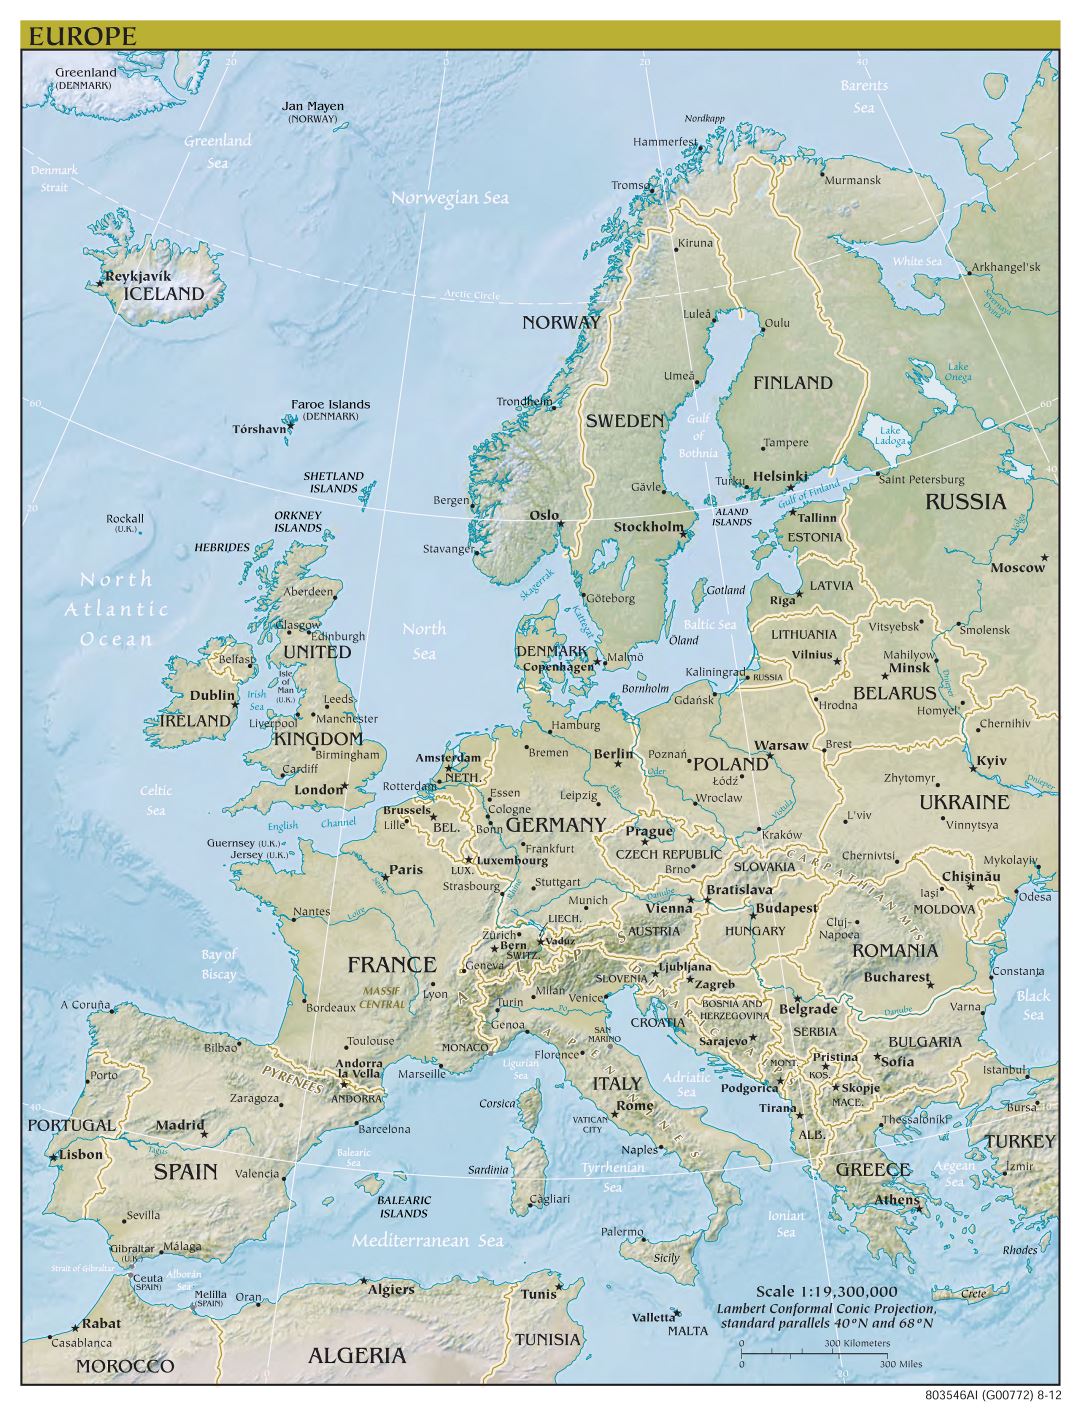 Large scale political map of Europe with relief, capitals and major cities - 2012